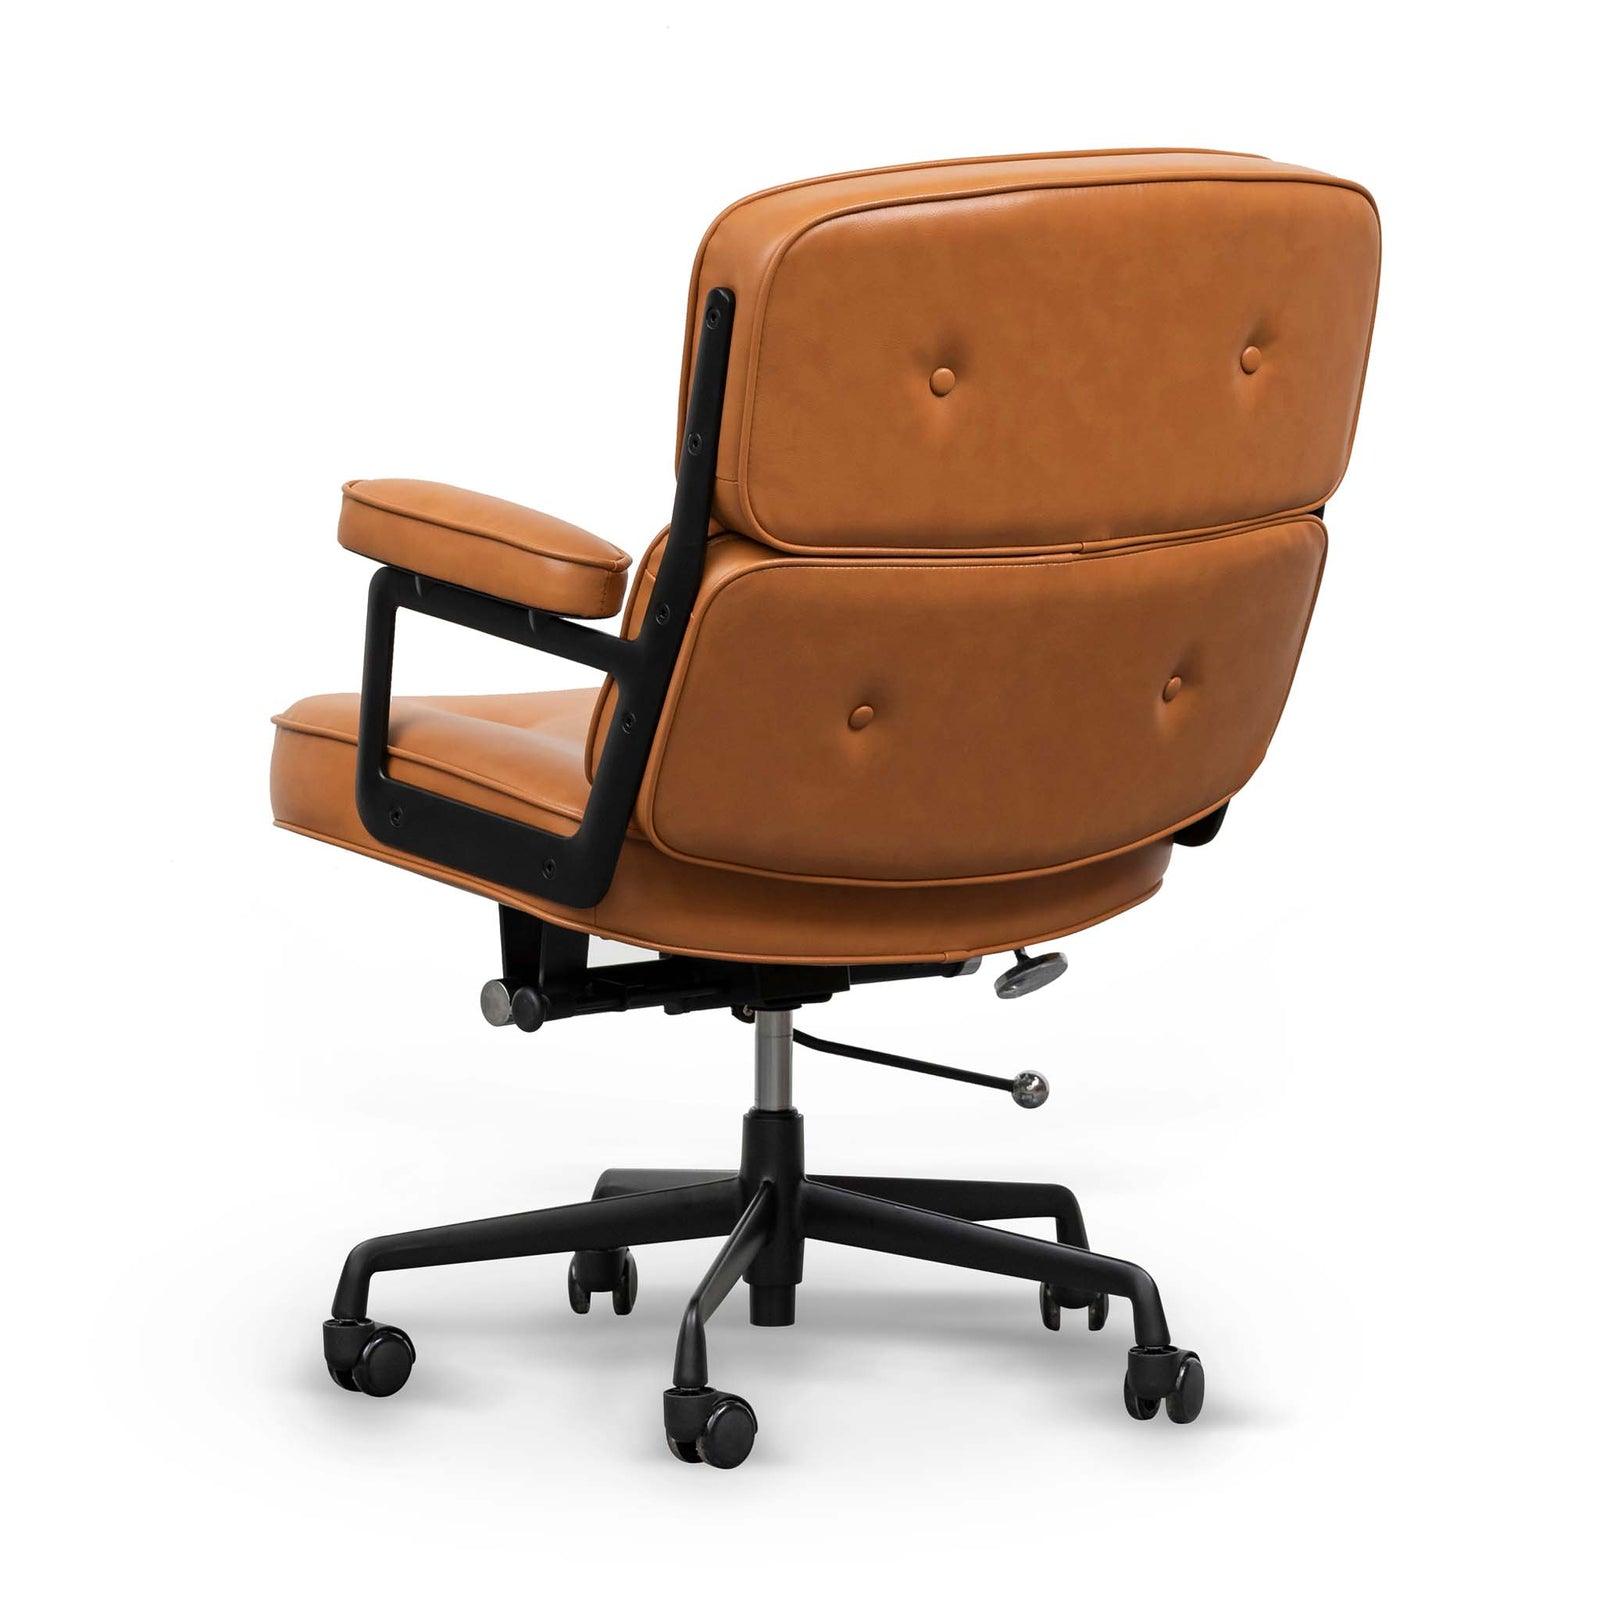 Office Chair - Honey Tan - Office/Gaming ChairsOC8206-YS 4